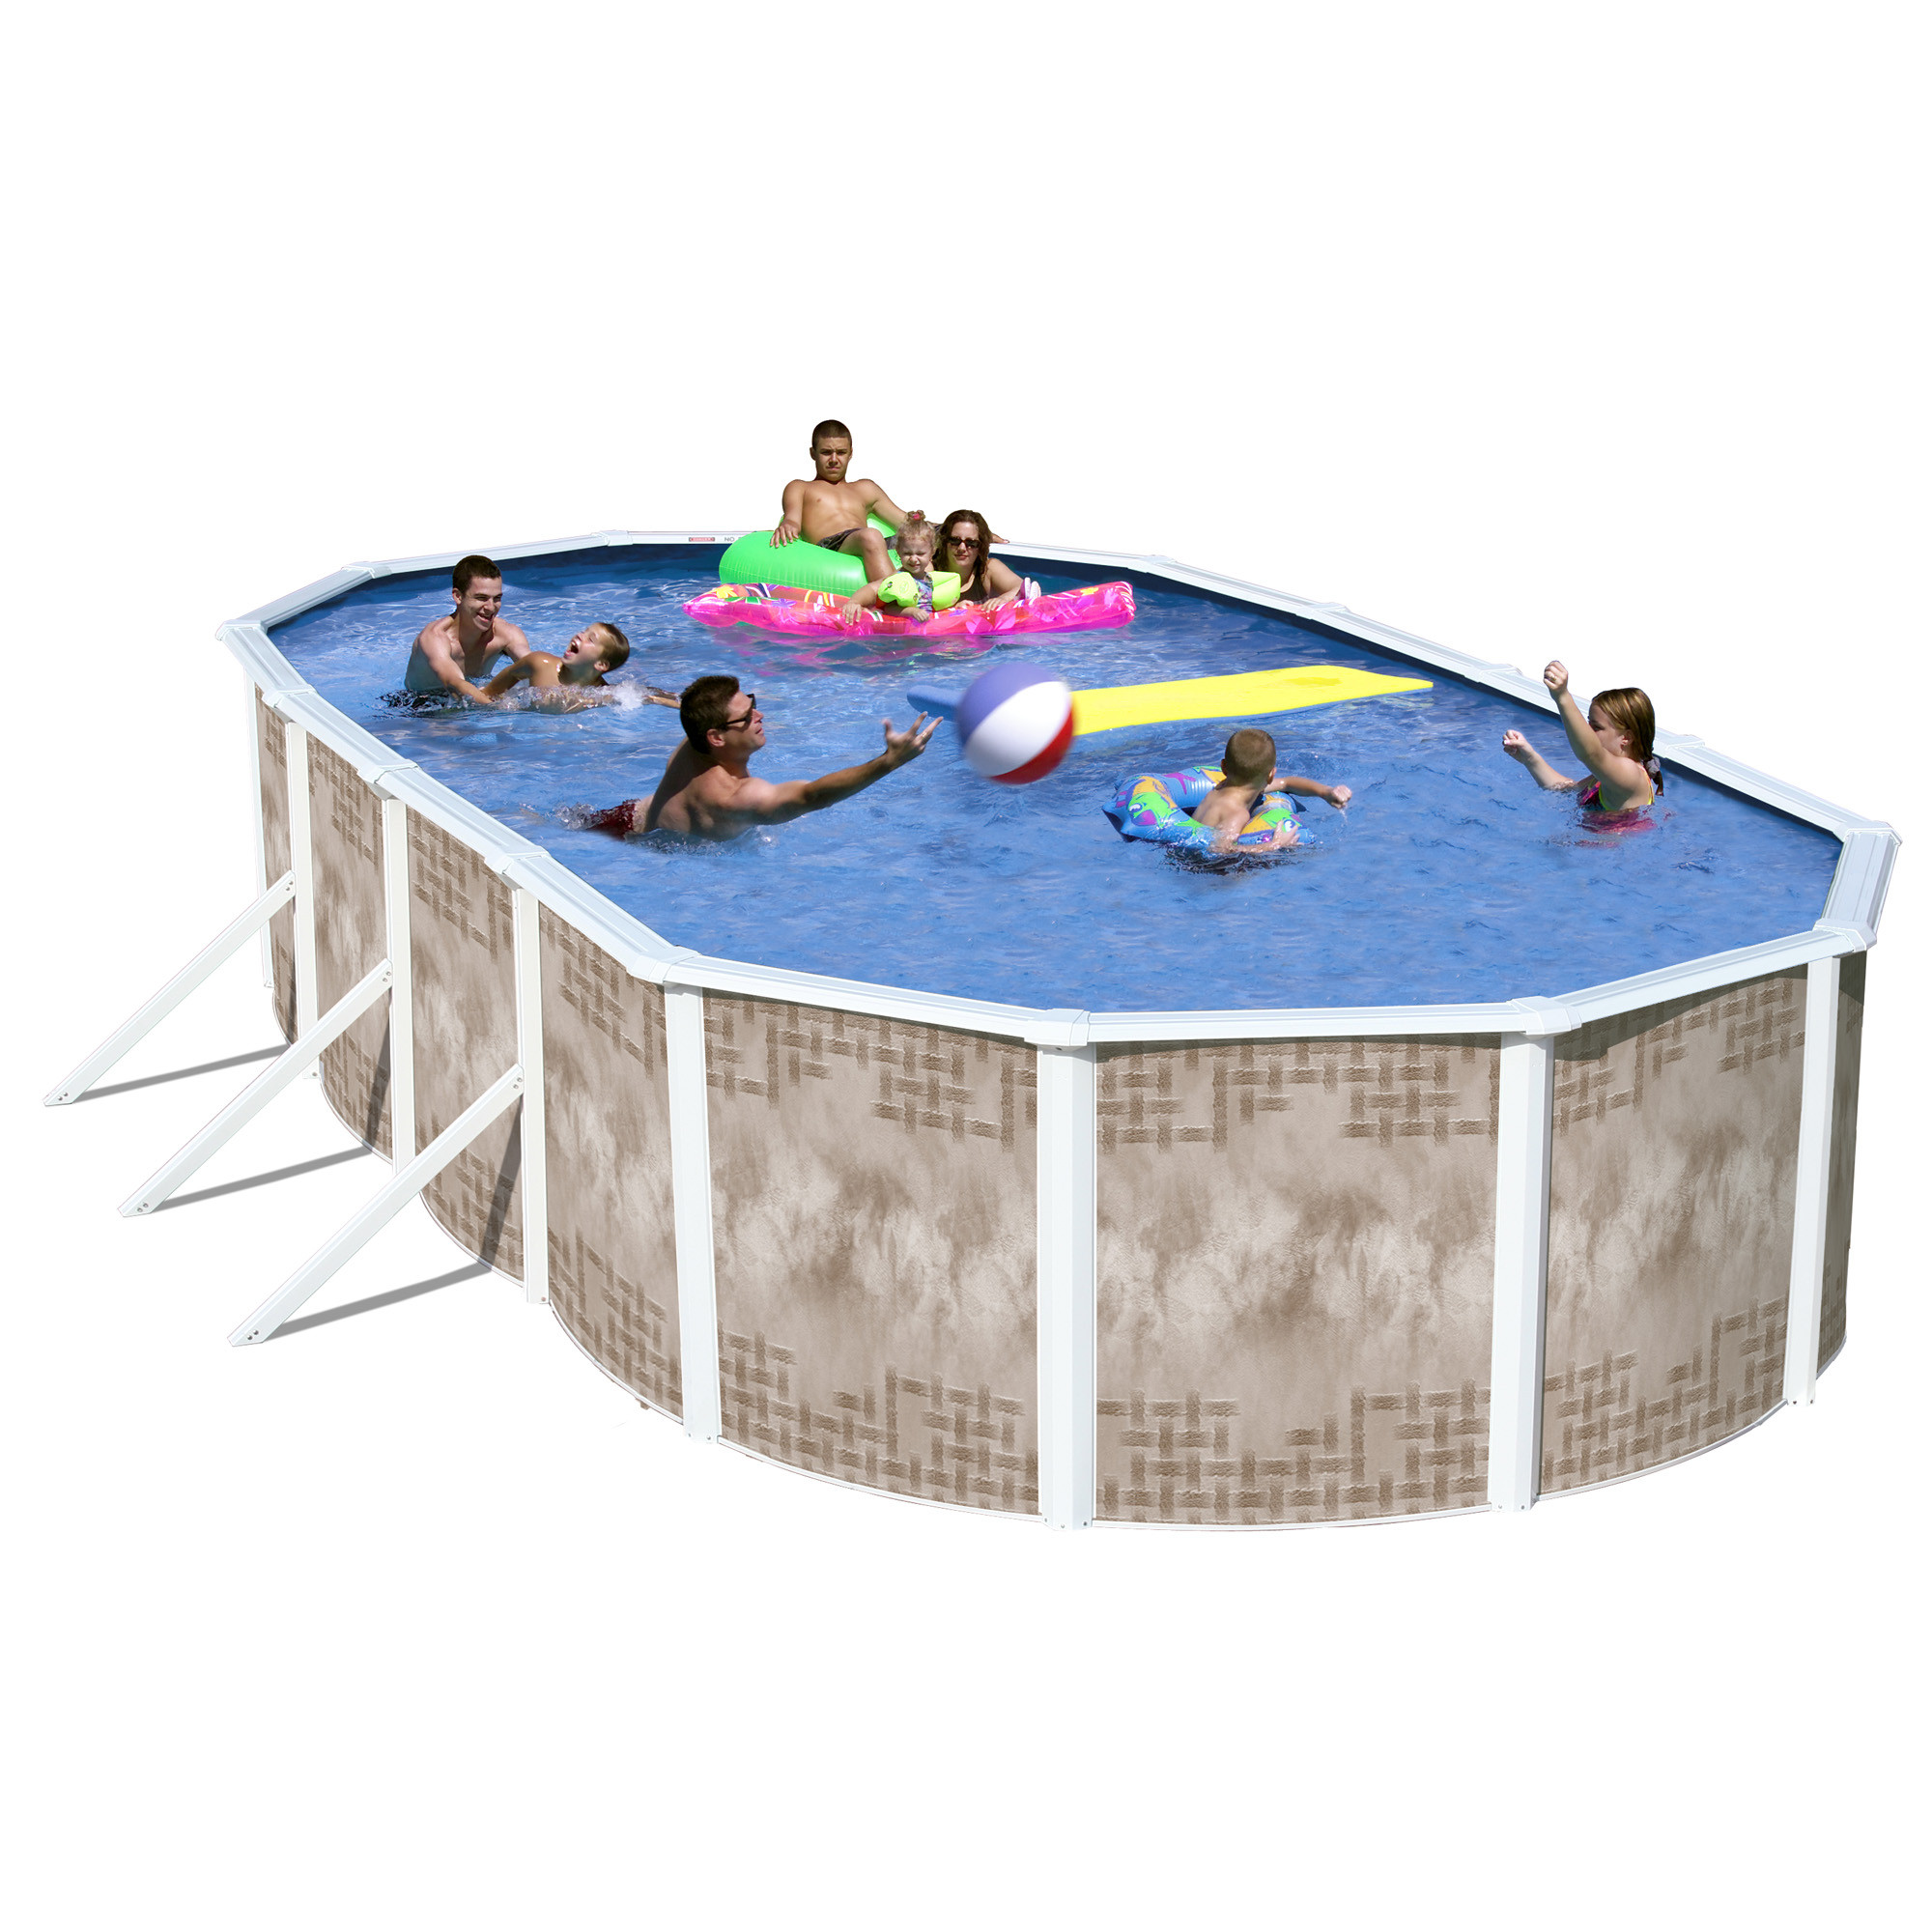 24 Above Ground Pool Packages
 Heritage 24 x 12 x 52" Yosemite plete Ground